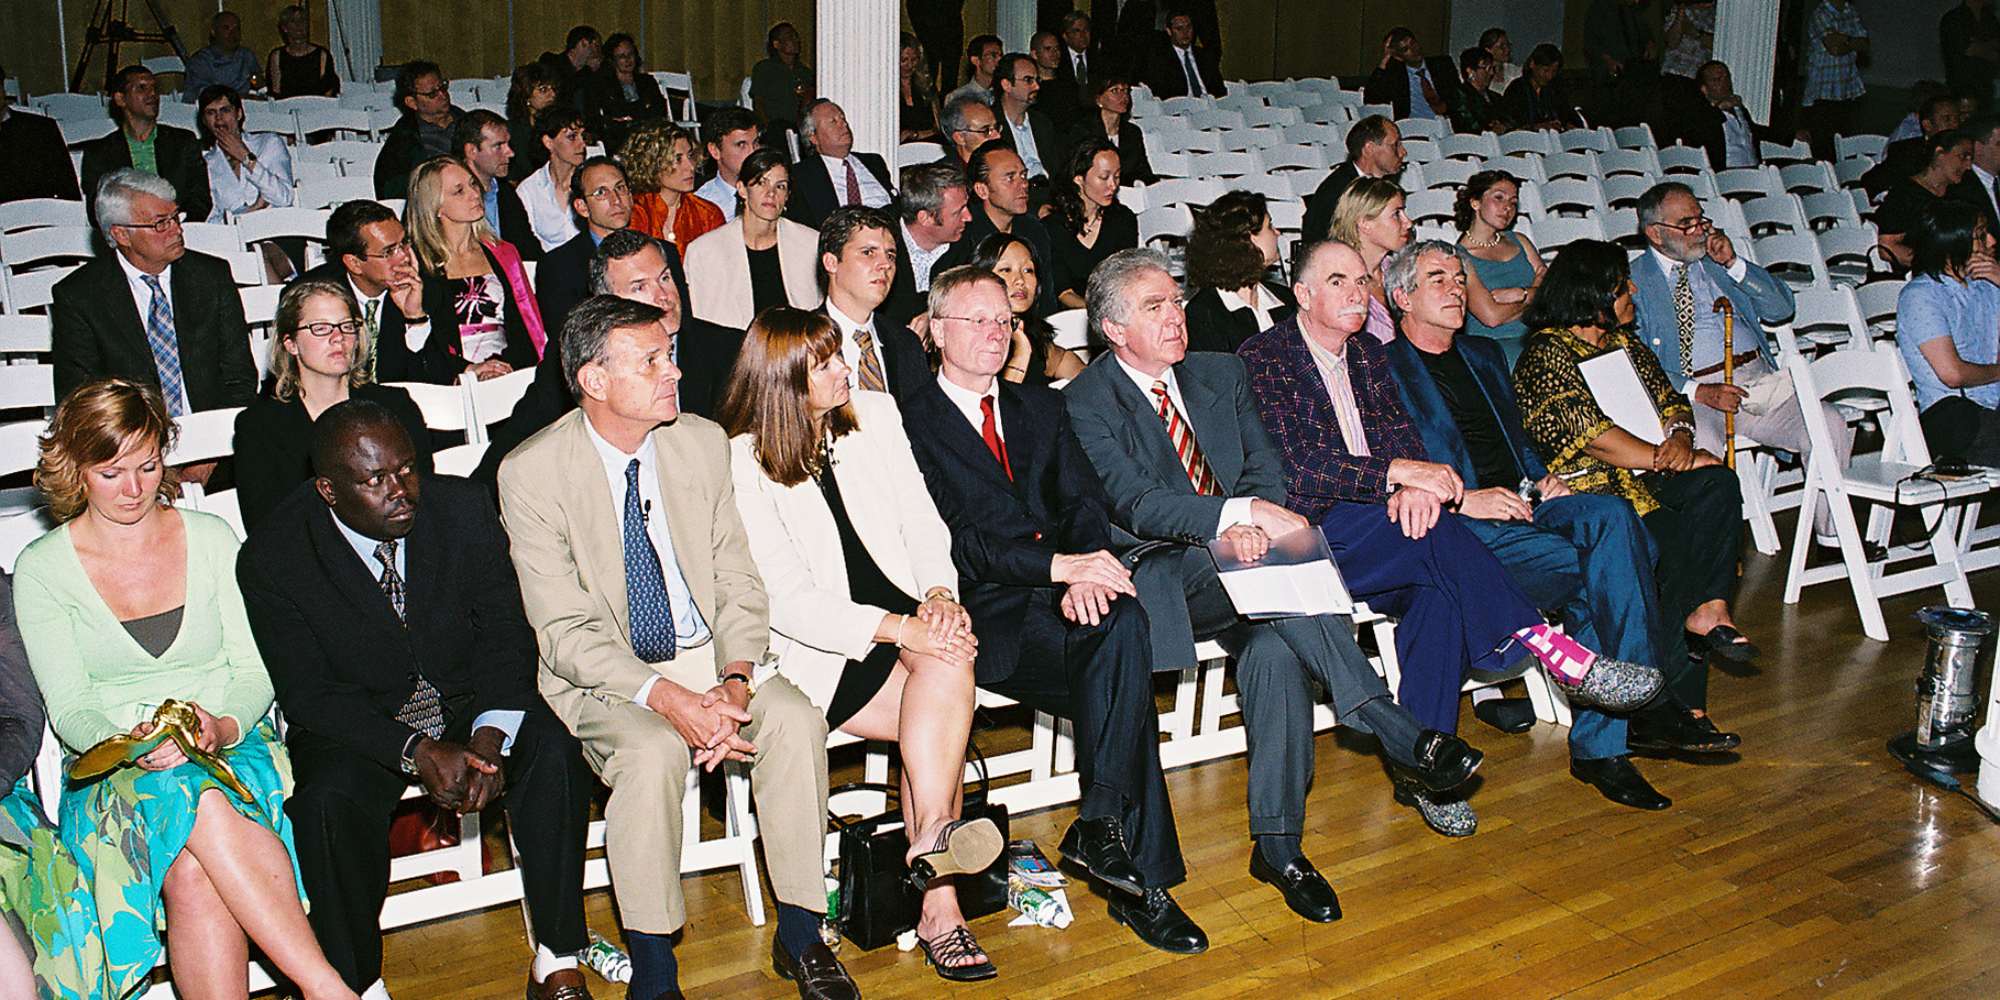 Audience at the Prix gala in New York